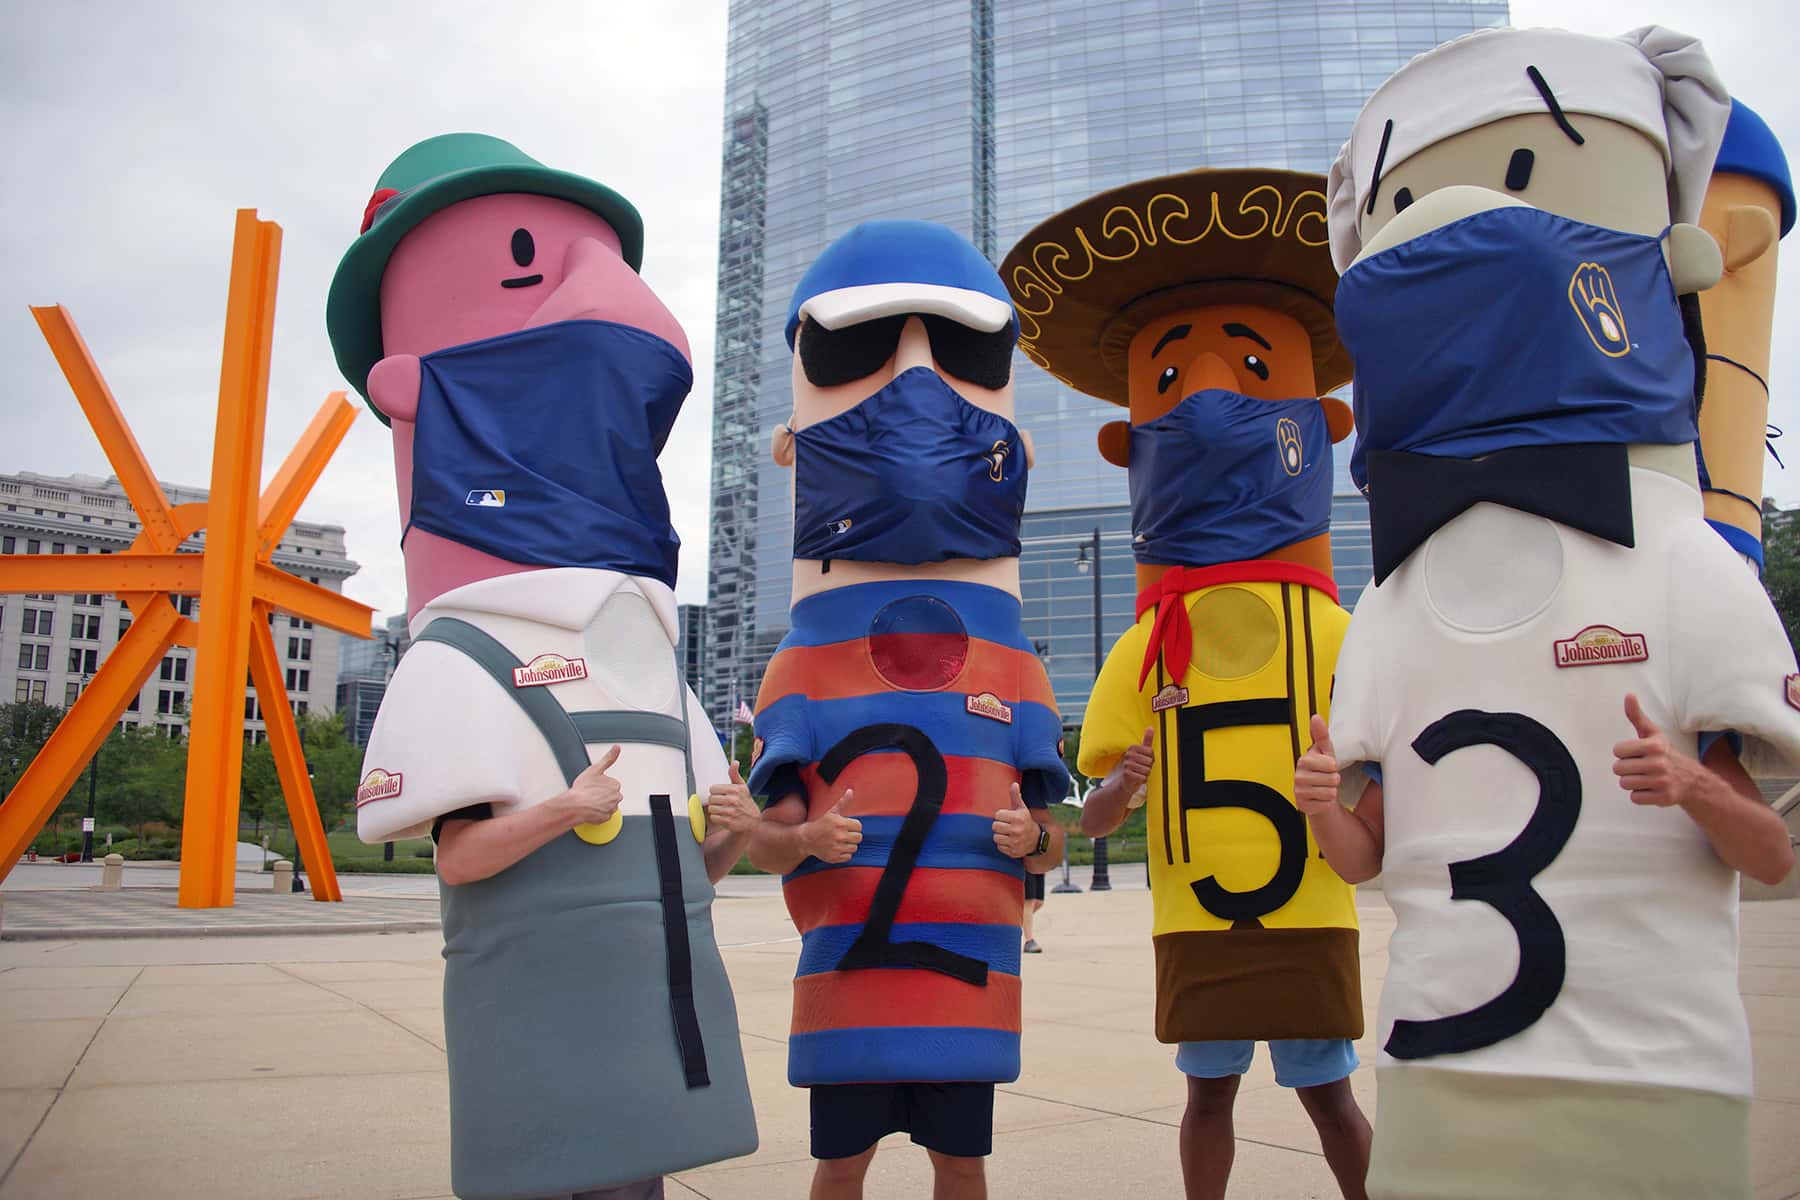 Watch: Relishing 20 years of the Brewers' Sausage Race, and my day